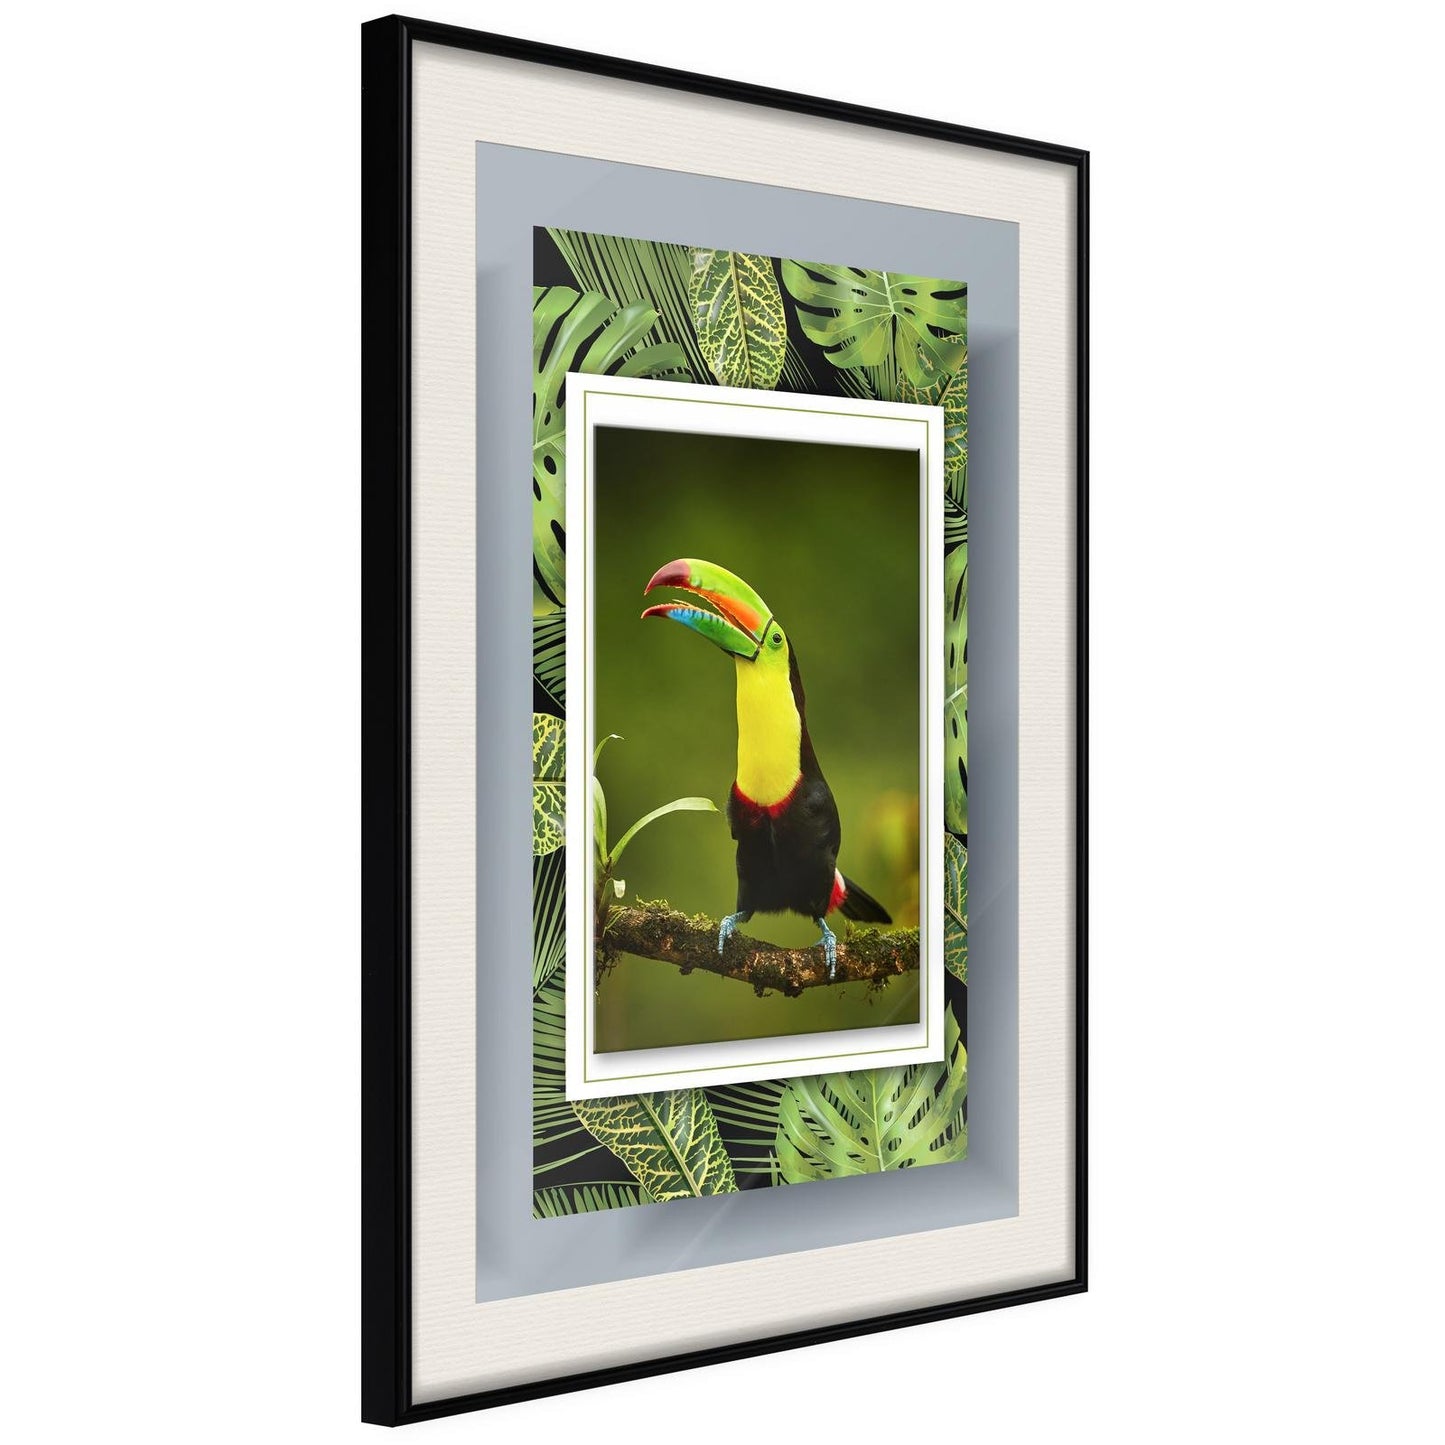 Toucan in the Frame